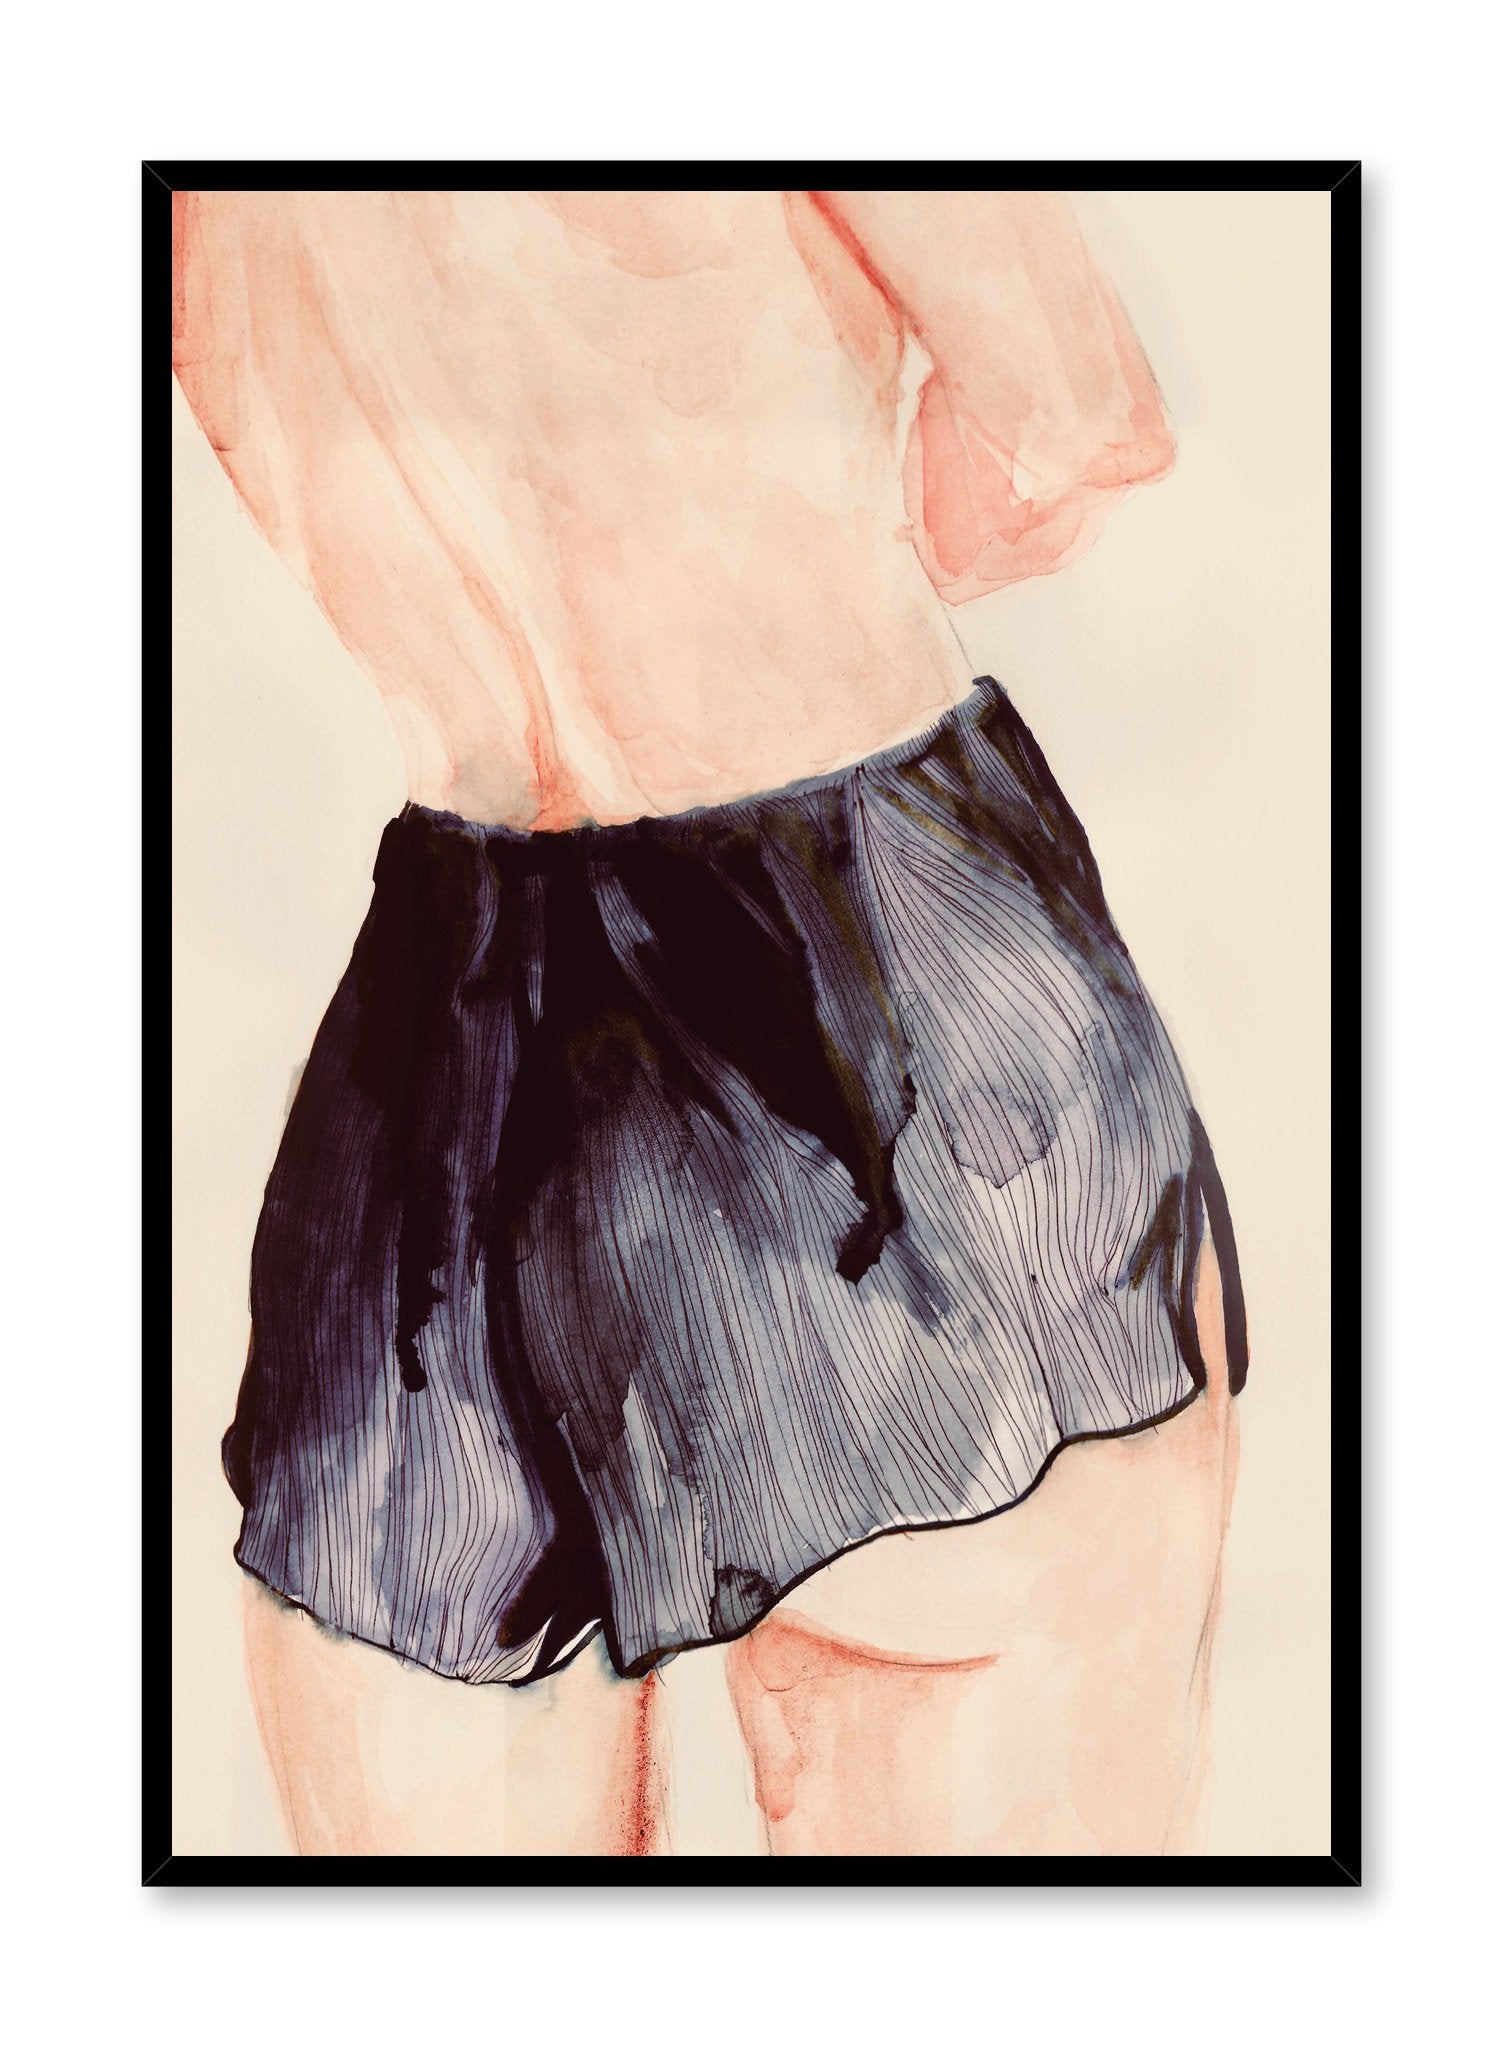 Fashion illustration poster by Opposite Wall with woman in shorts